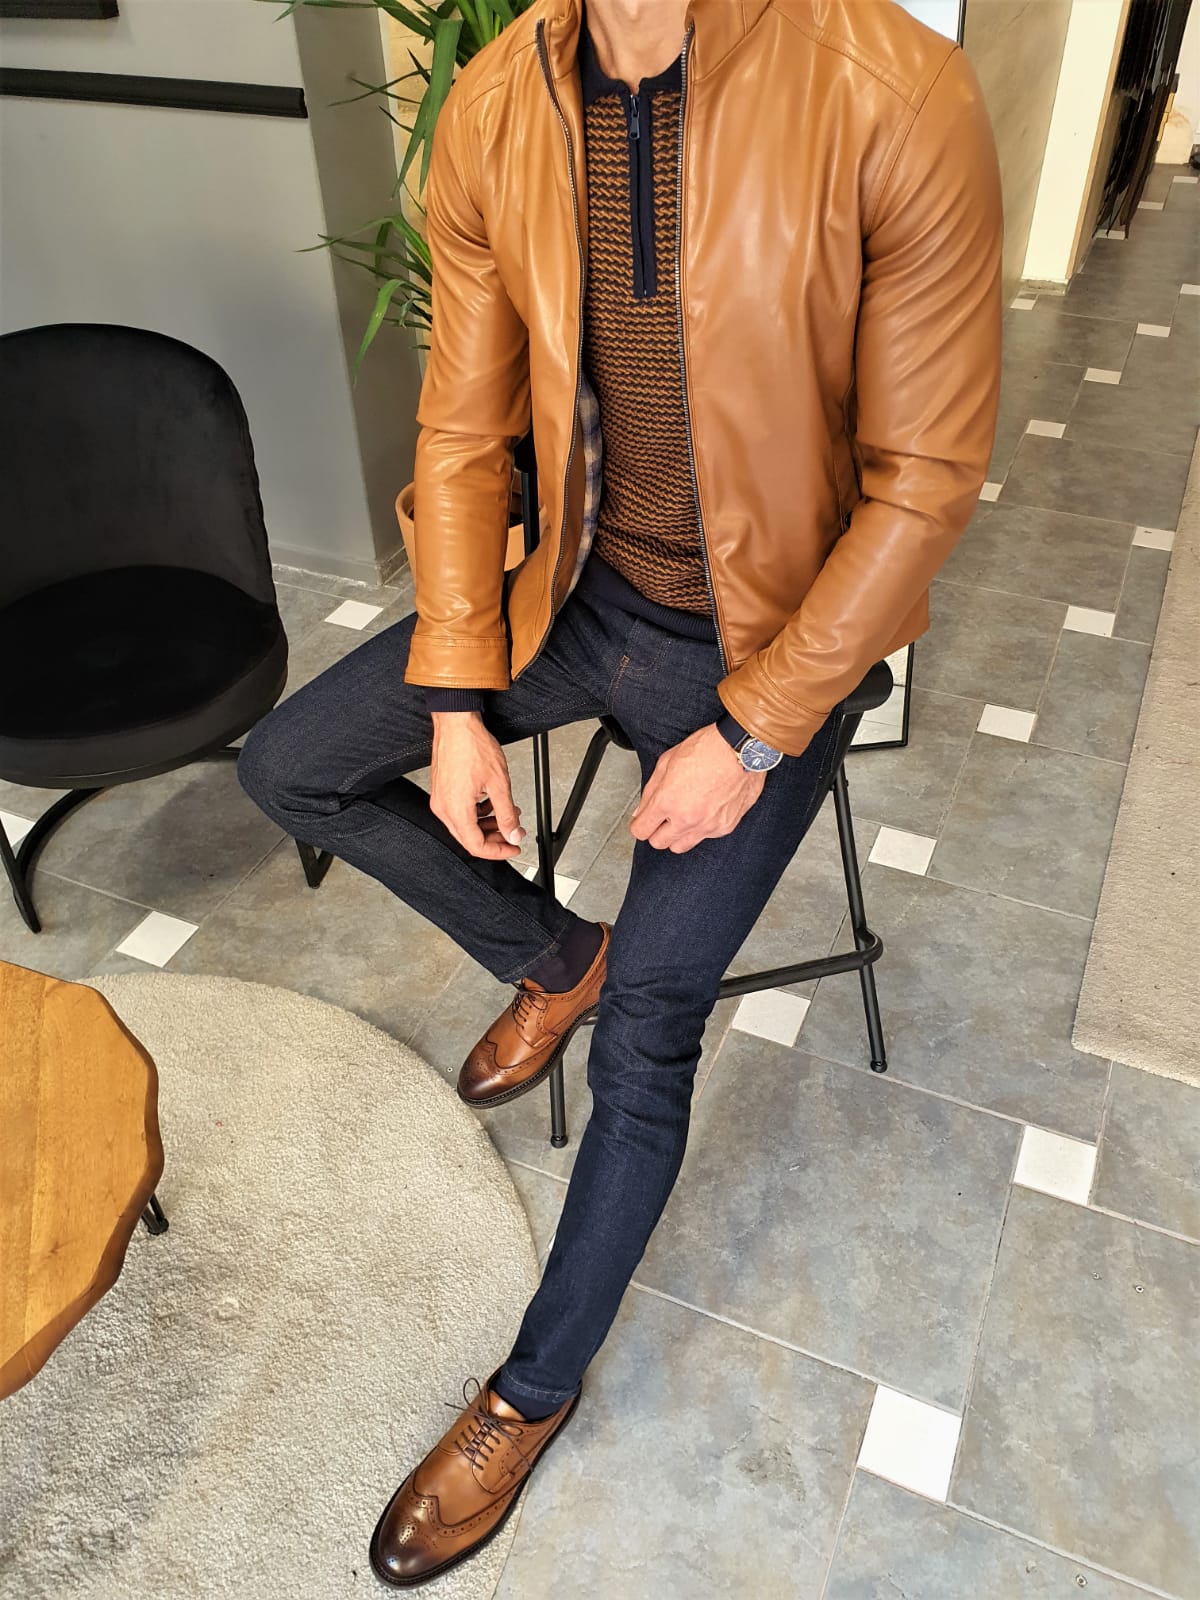 10 Men’s Style Tips To Look Powerful by GentWith Blog